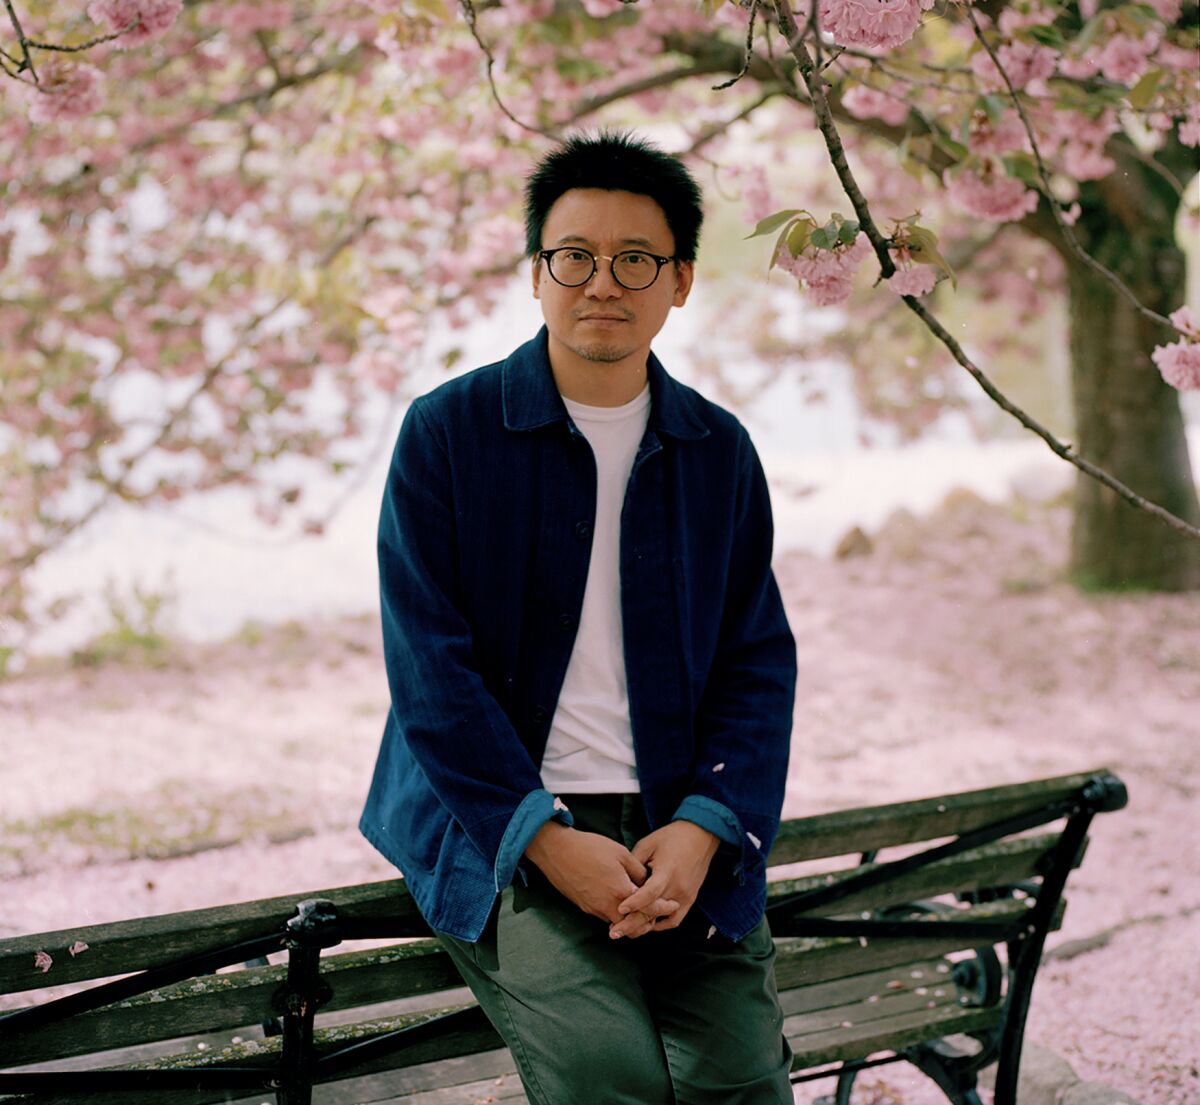 A casually dressed man leans against a park bench as pink cherry blossoms cover branches above him and the ground behind him